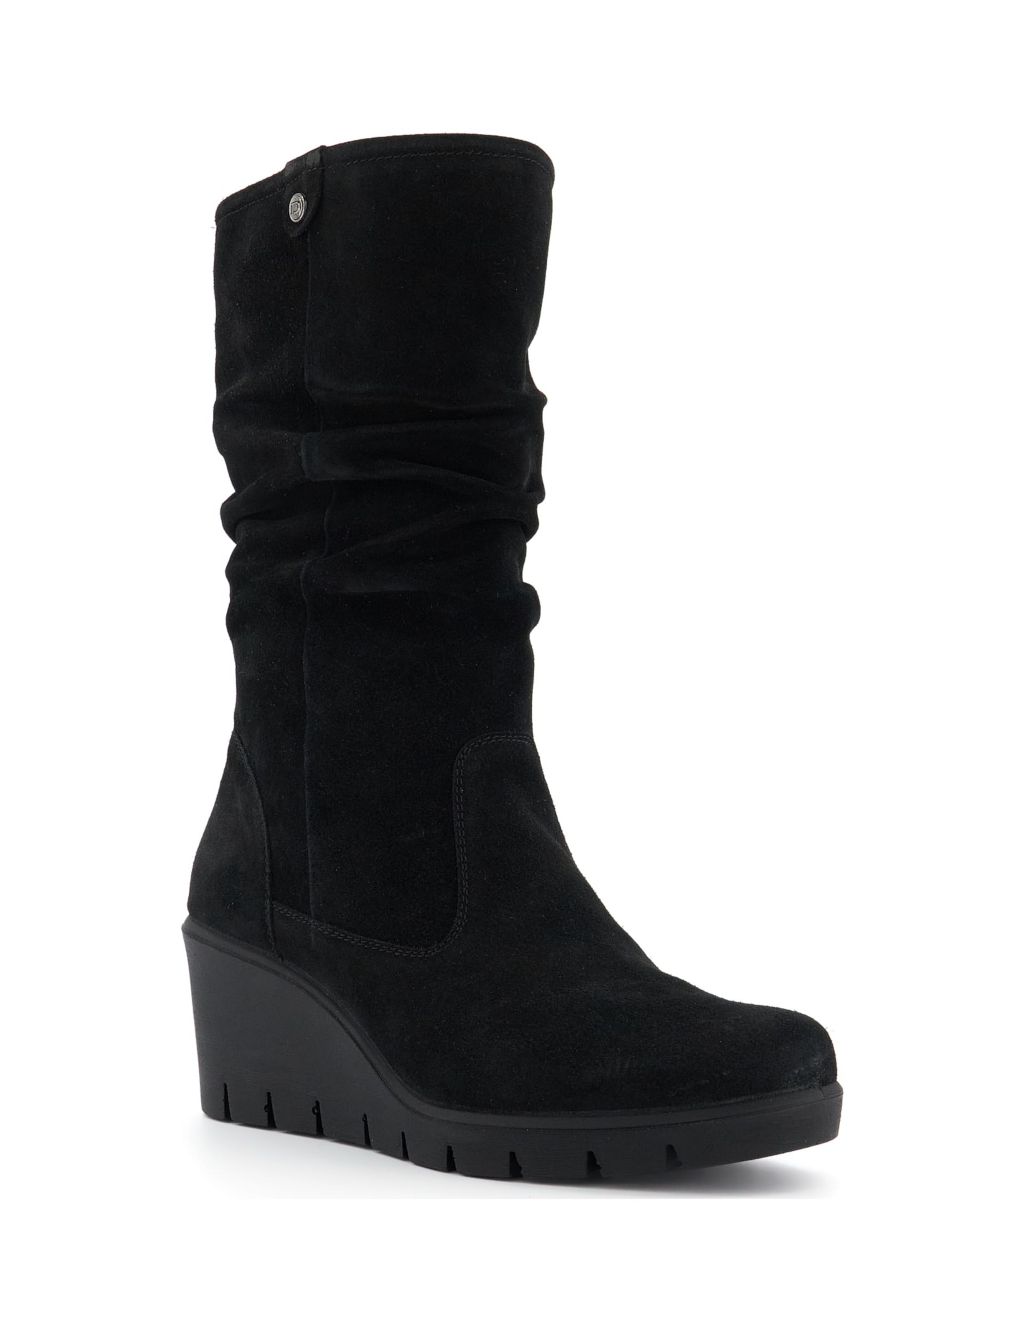 Suede Ruched Wedge Round Toe Boots image 2